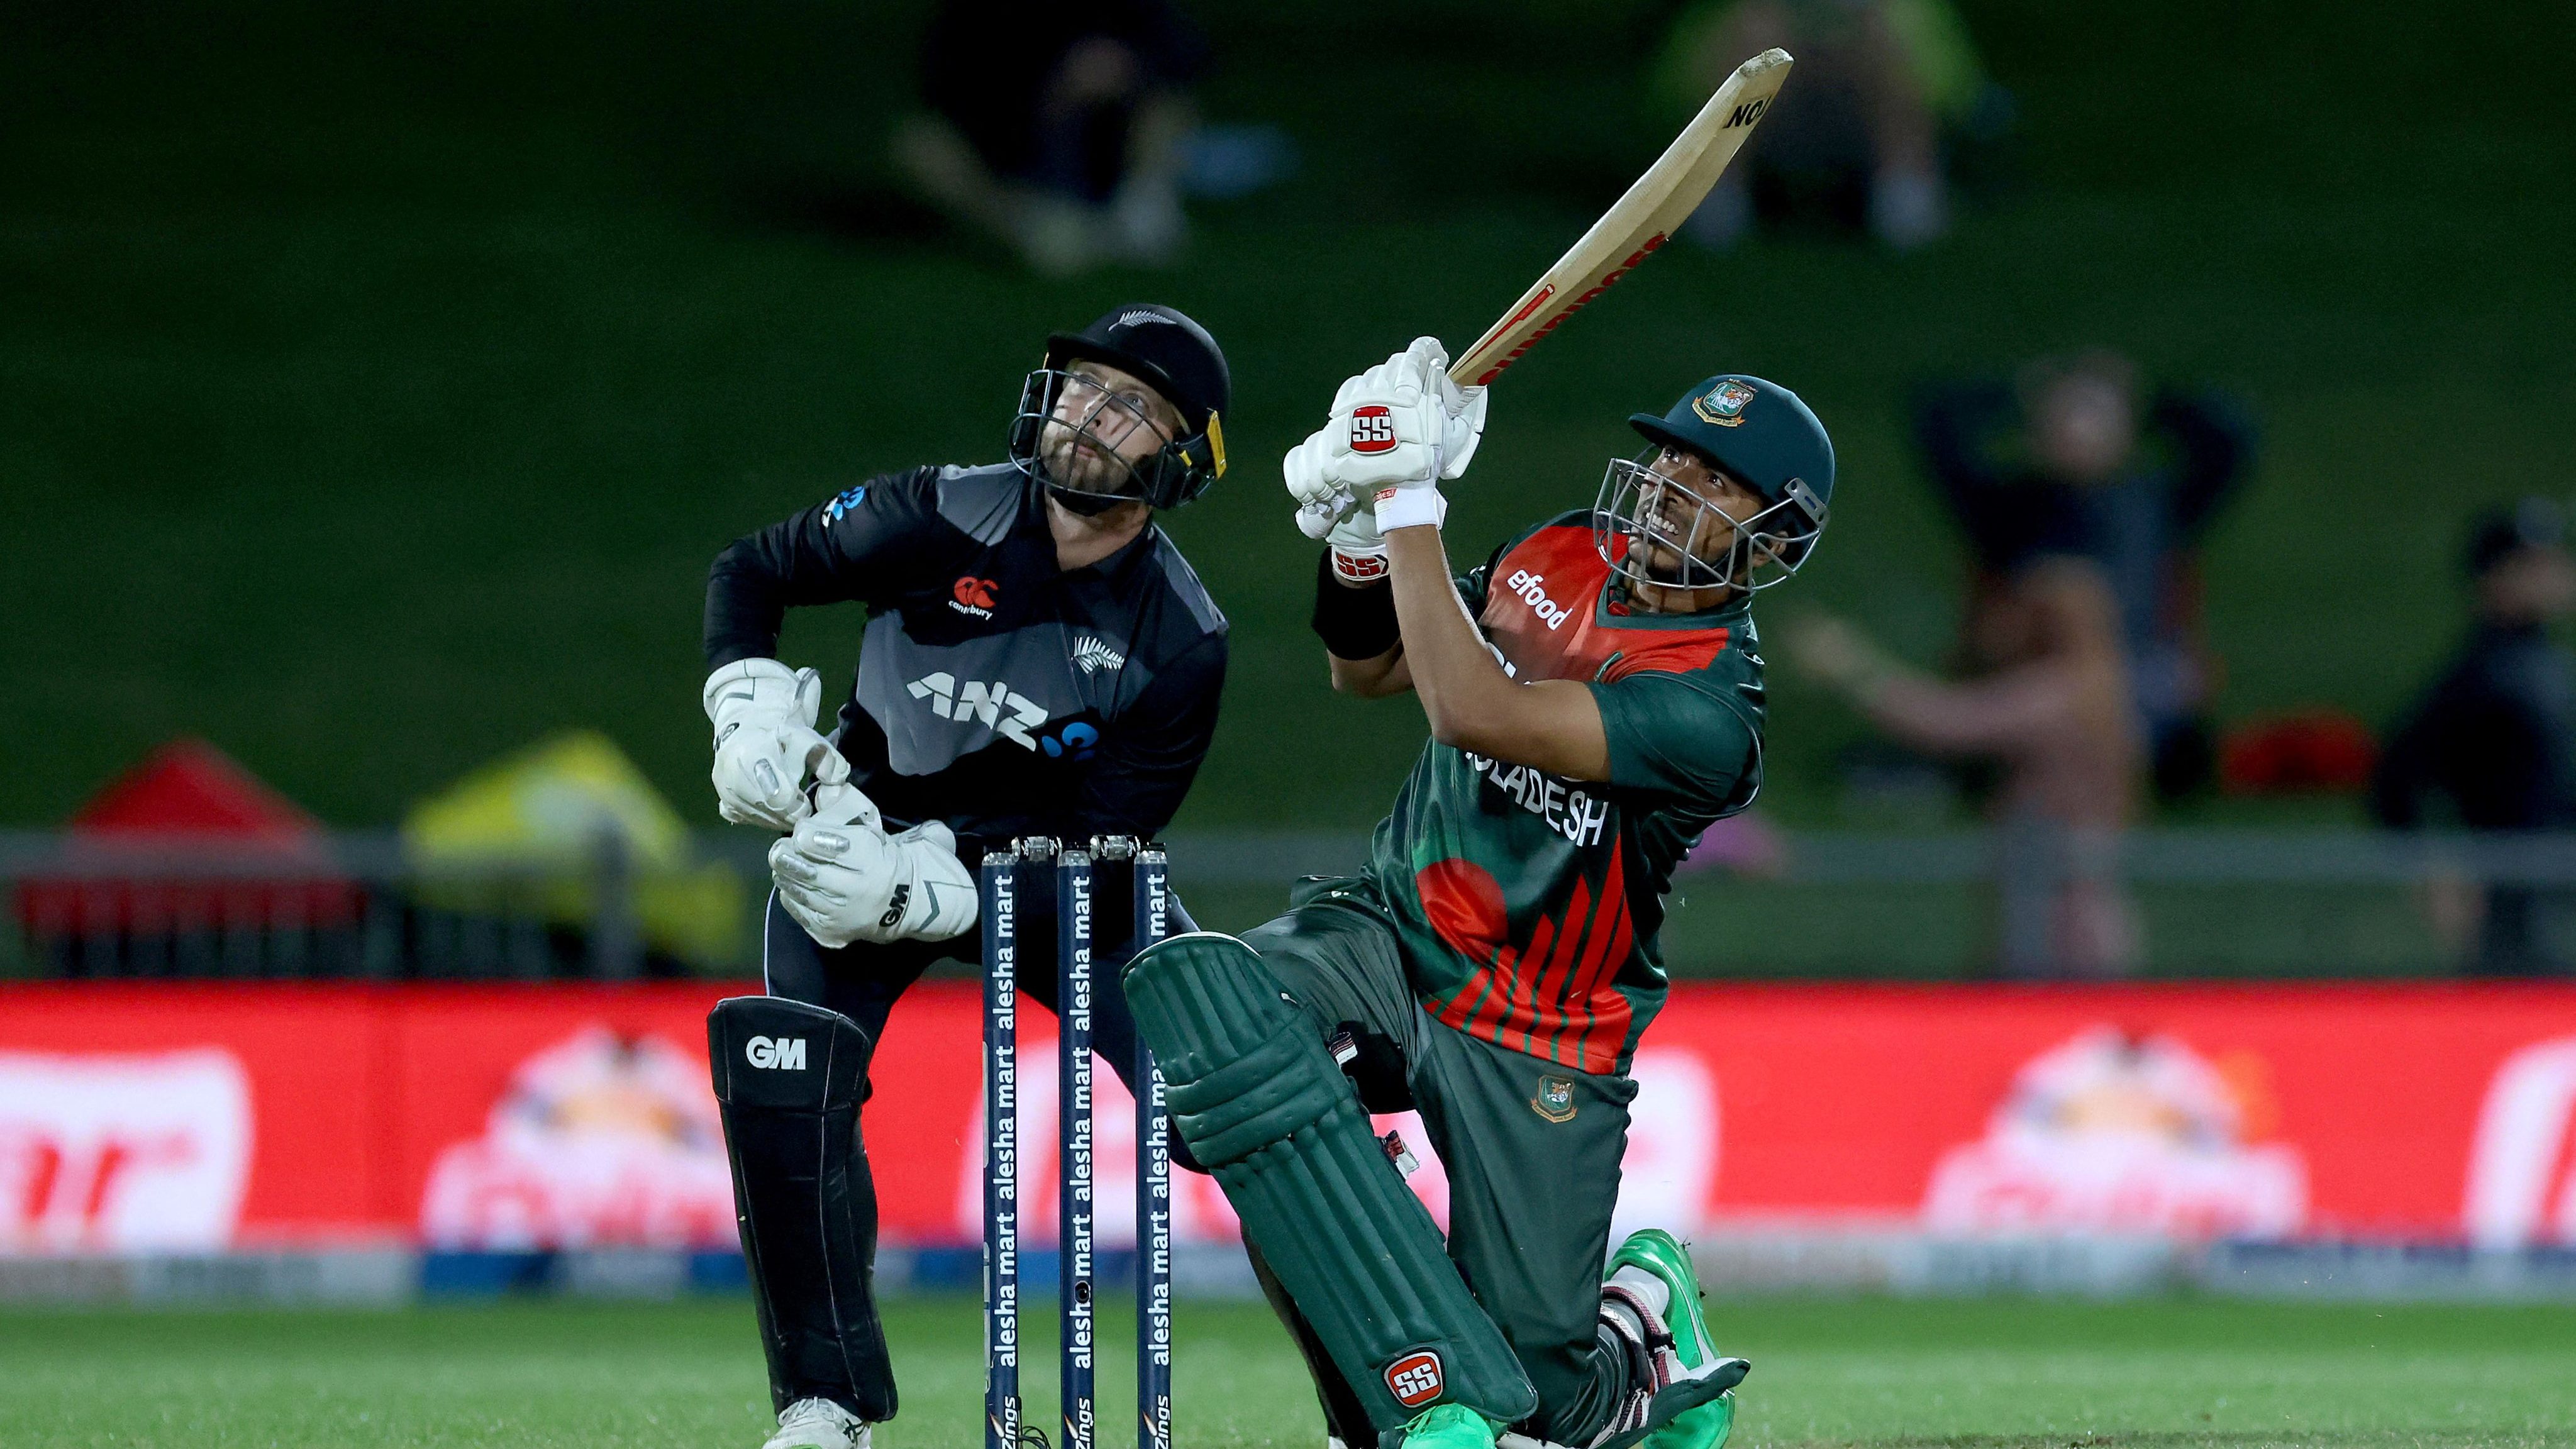 NZ vs BAN Bangladesh come out to bat without knowing their DLS target